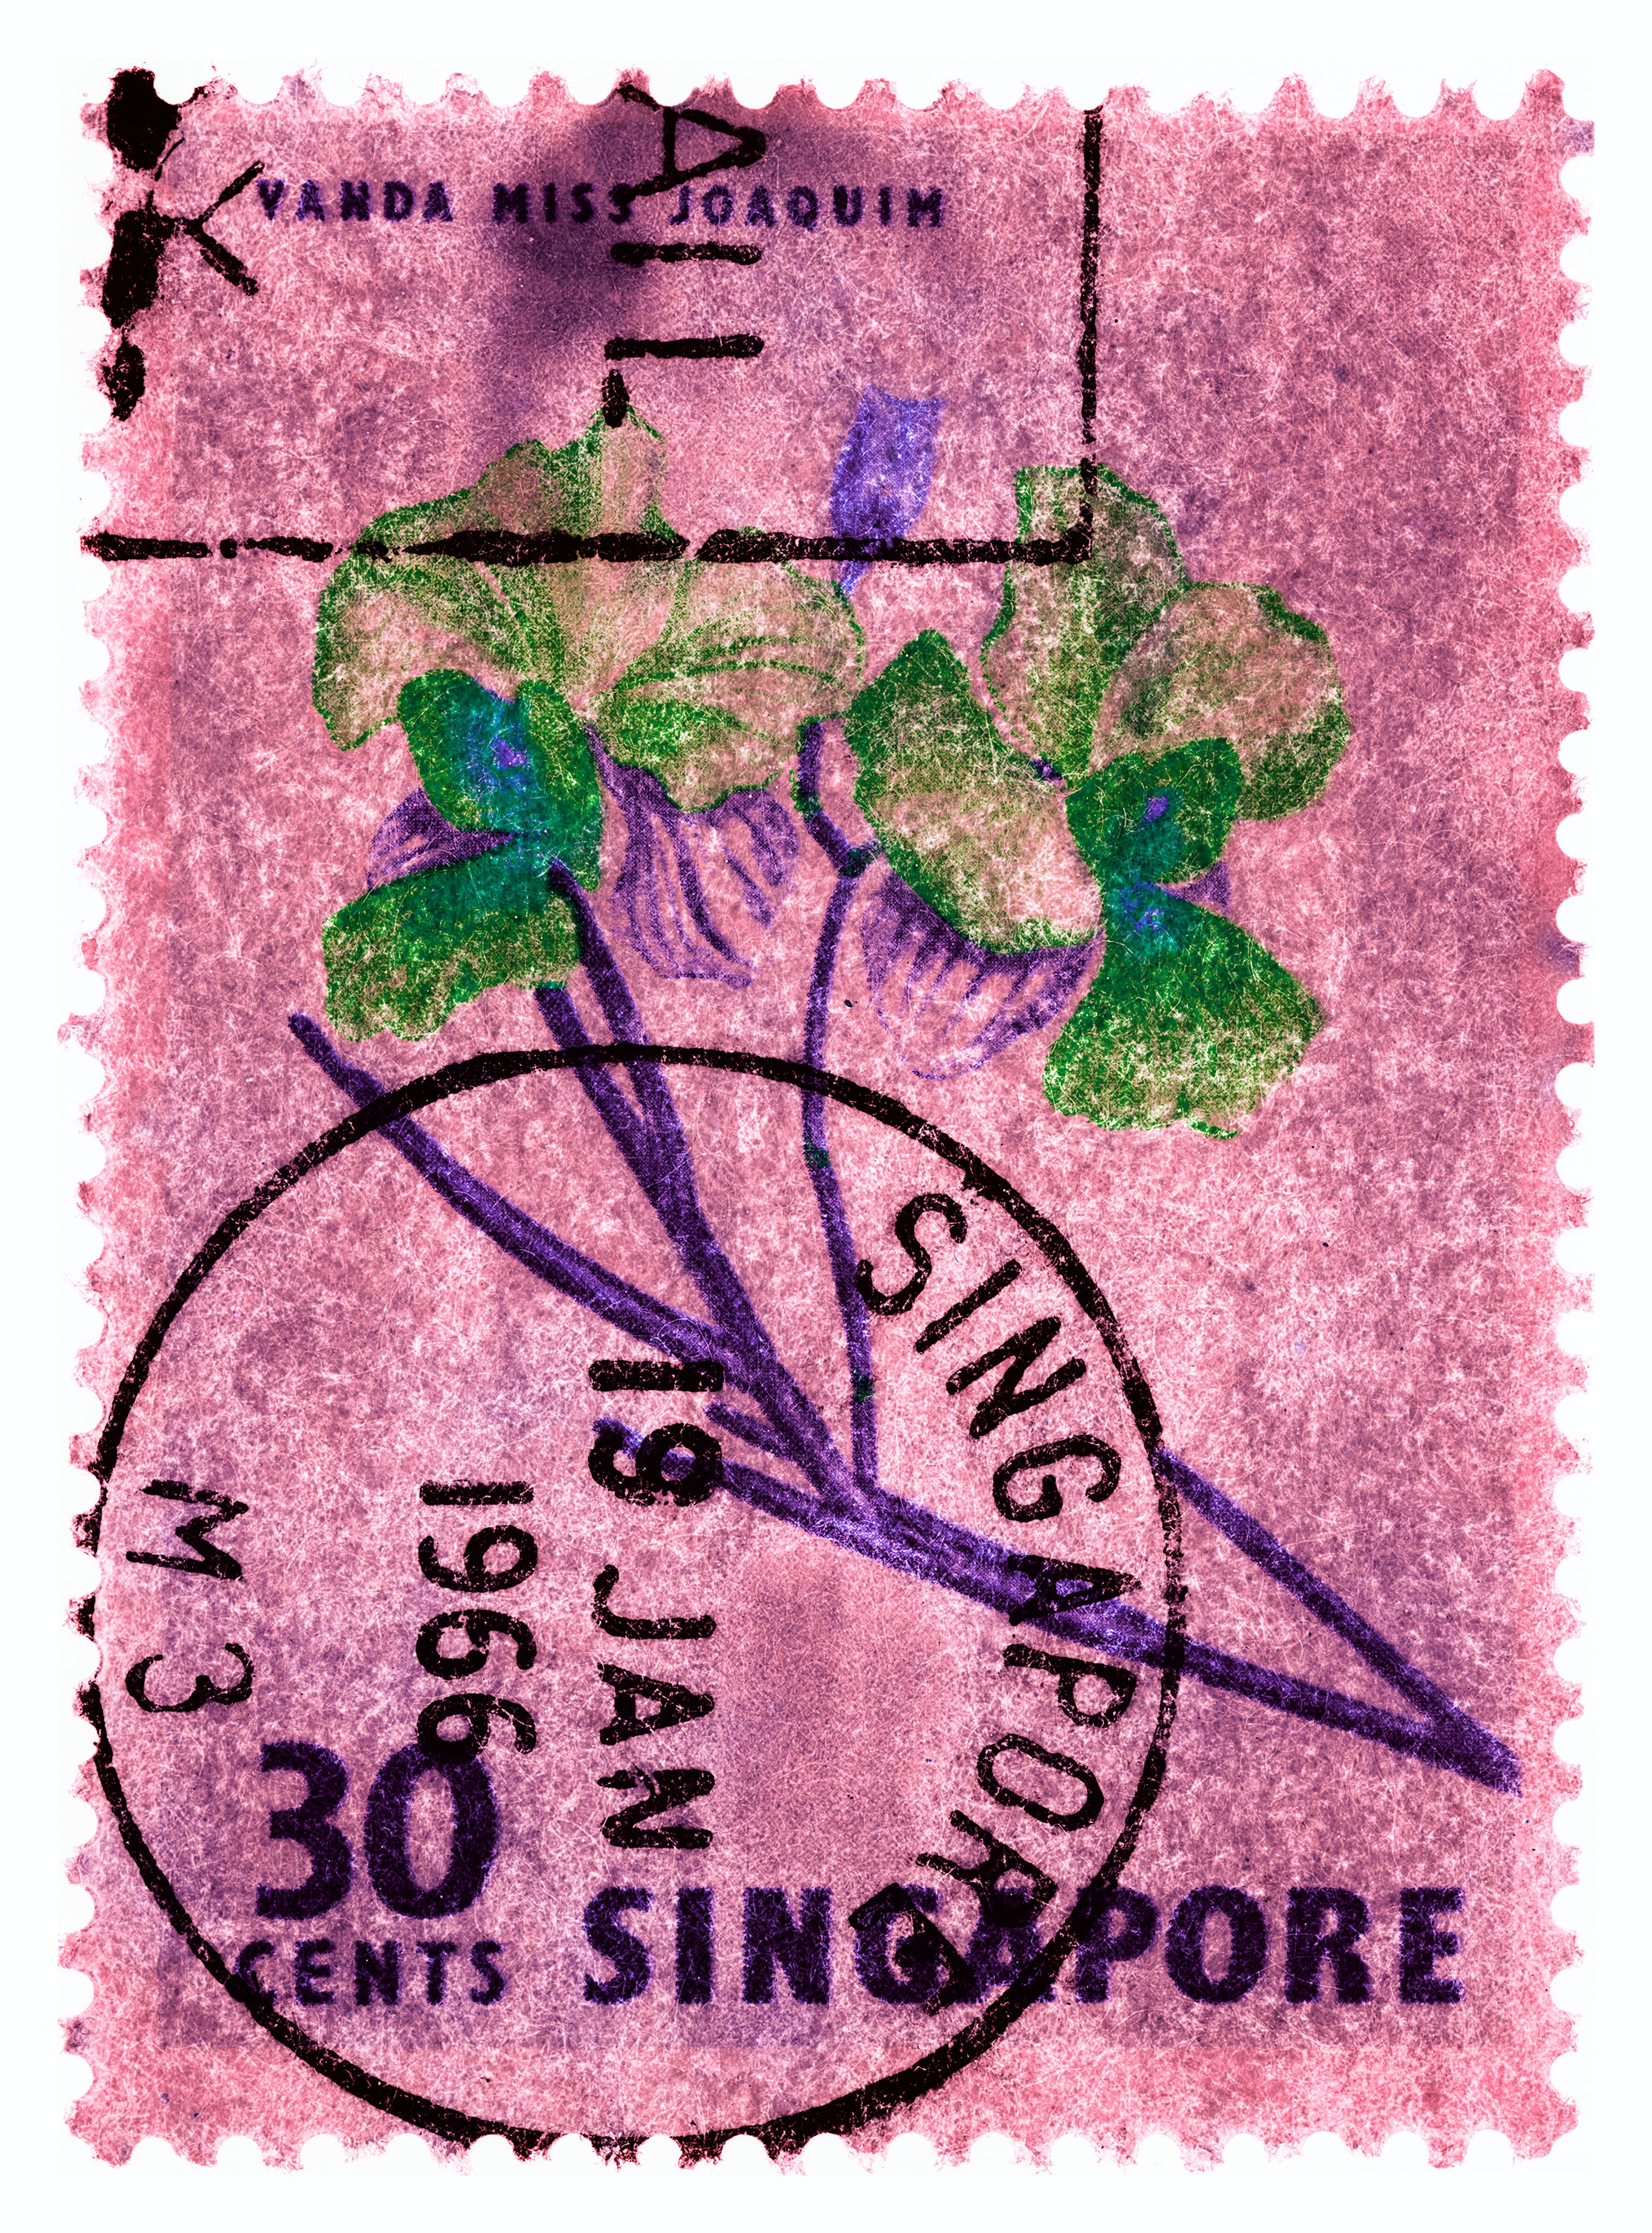 Singapore Stamp Collection, 30c Singapore Four - Floral color photo - Gray Print by Heidler & Heeps